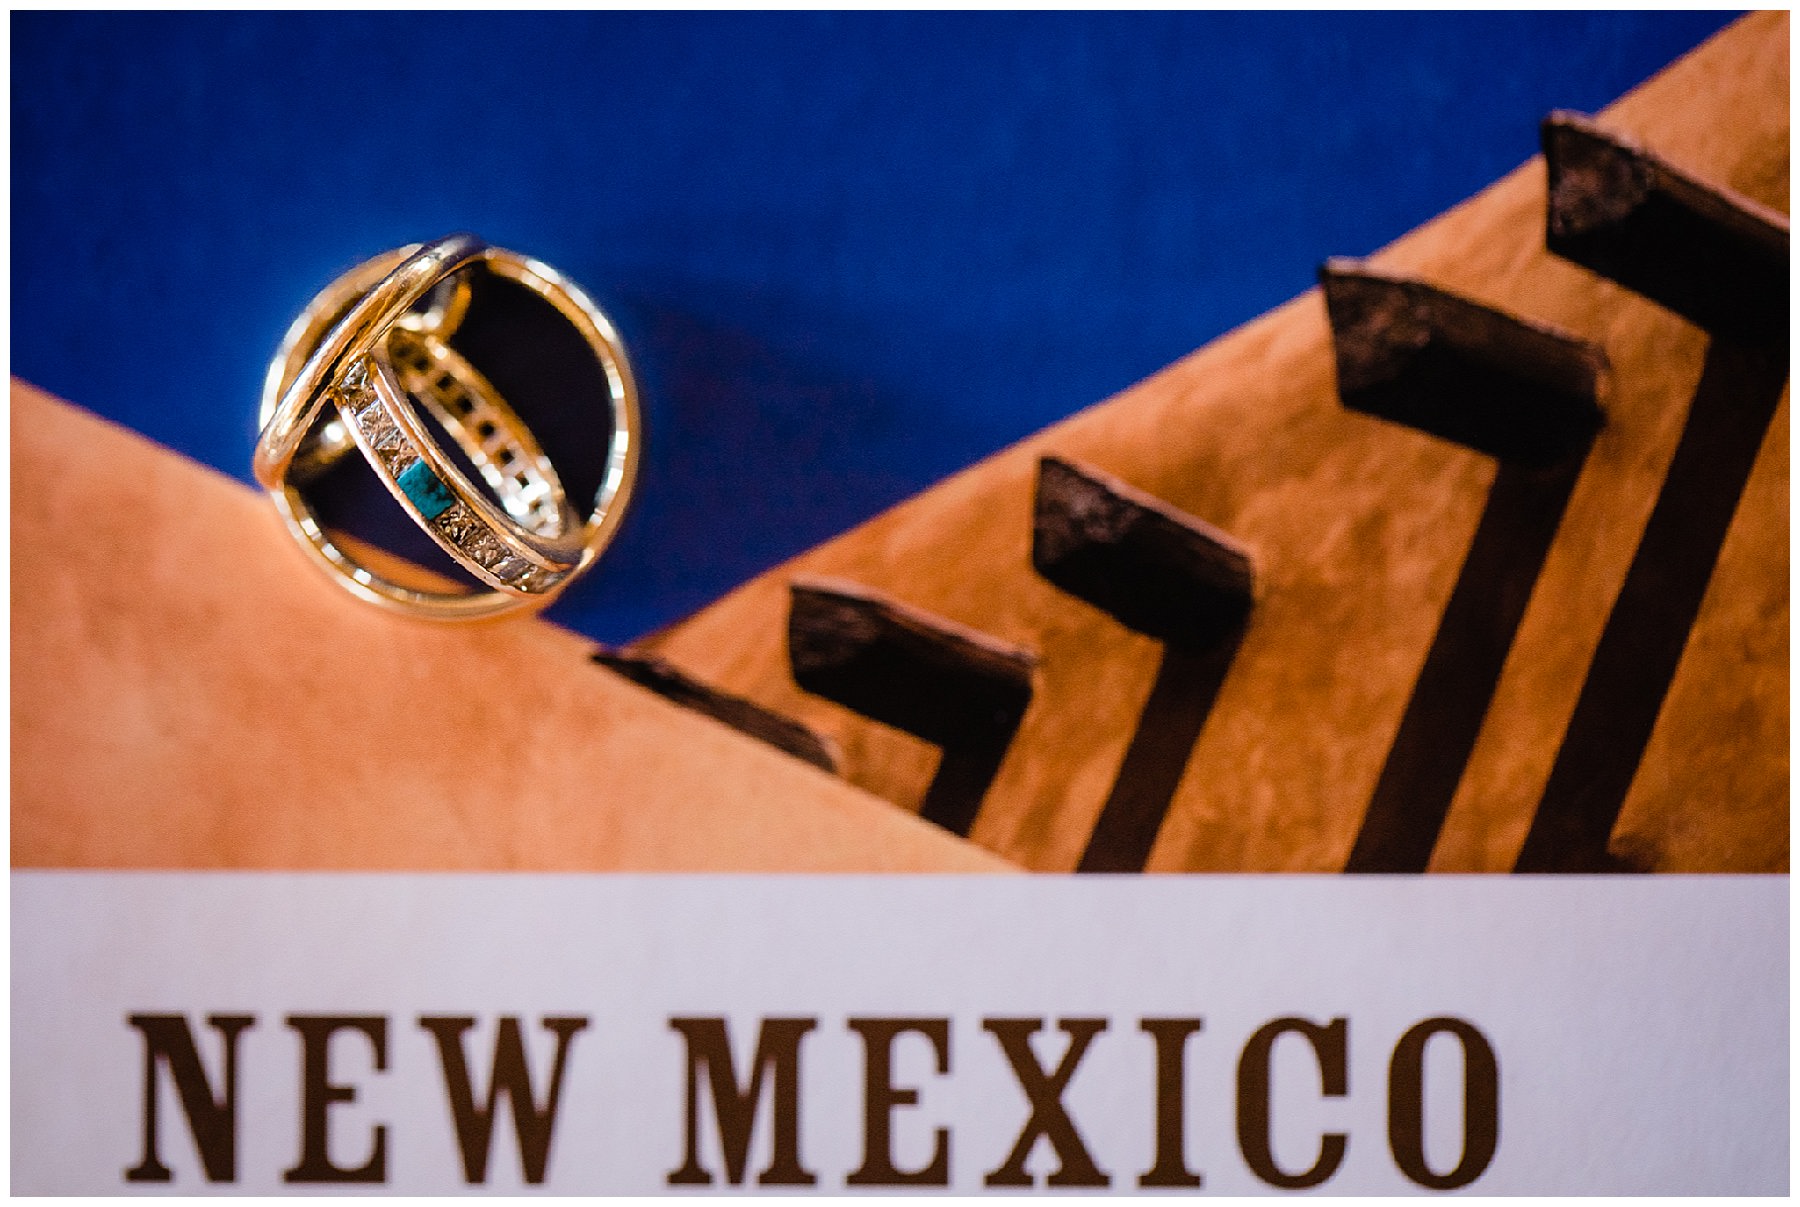 Unique wedding rings with a southwest vibe